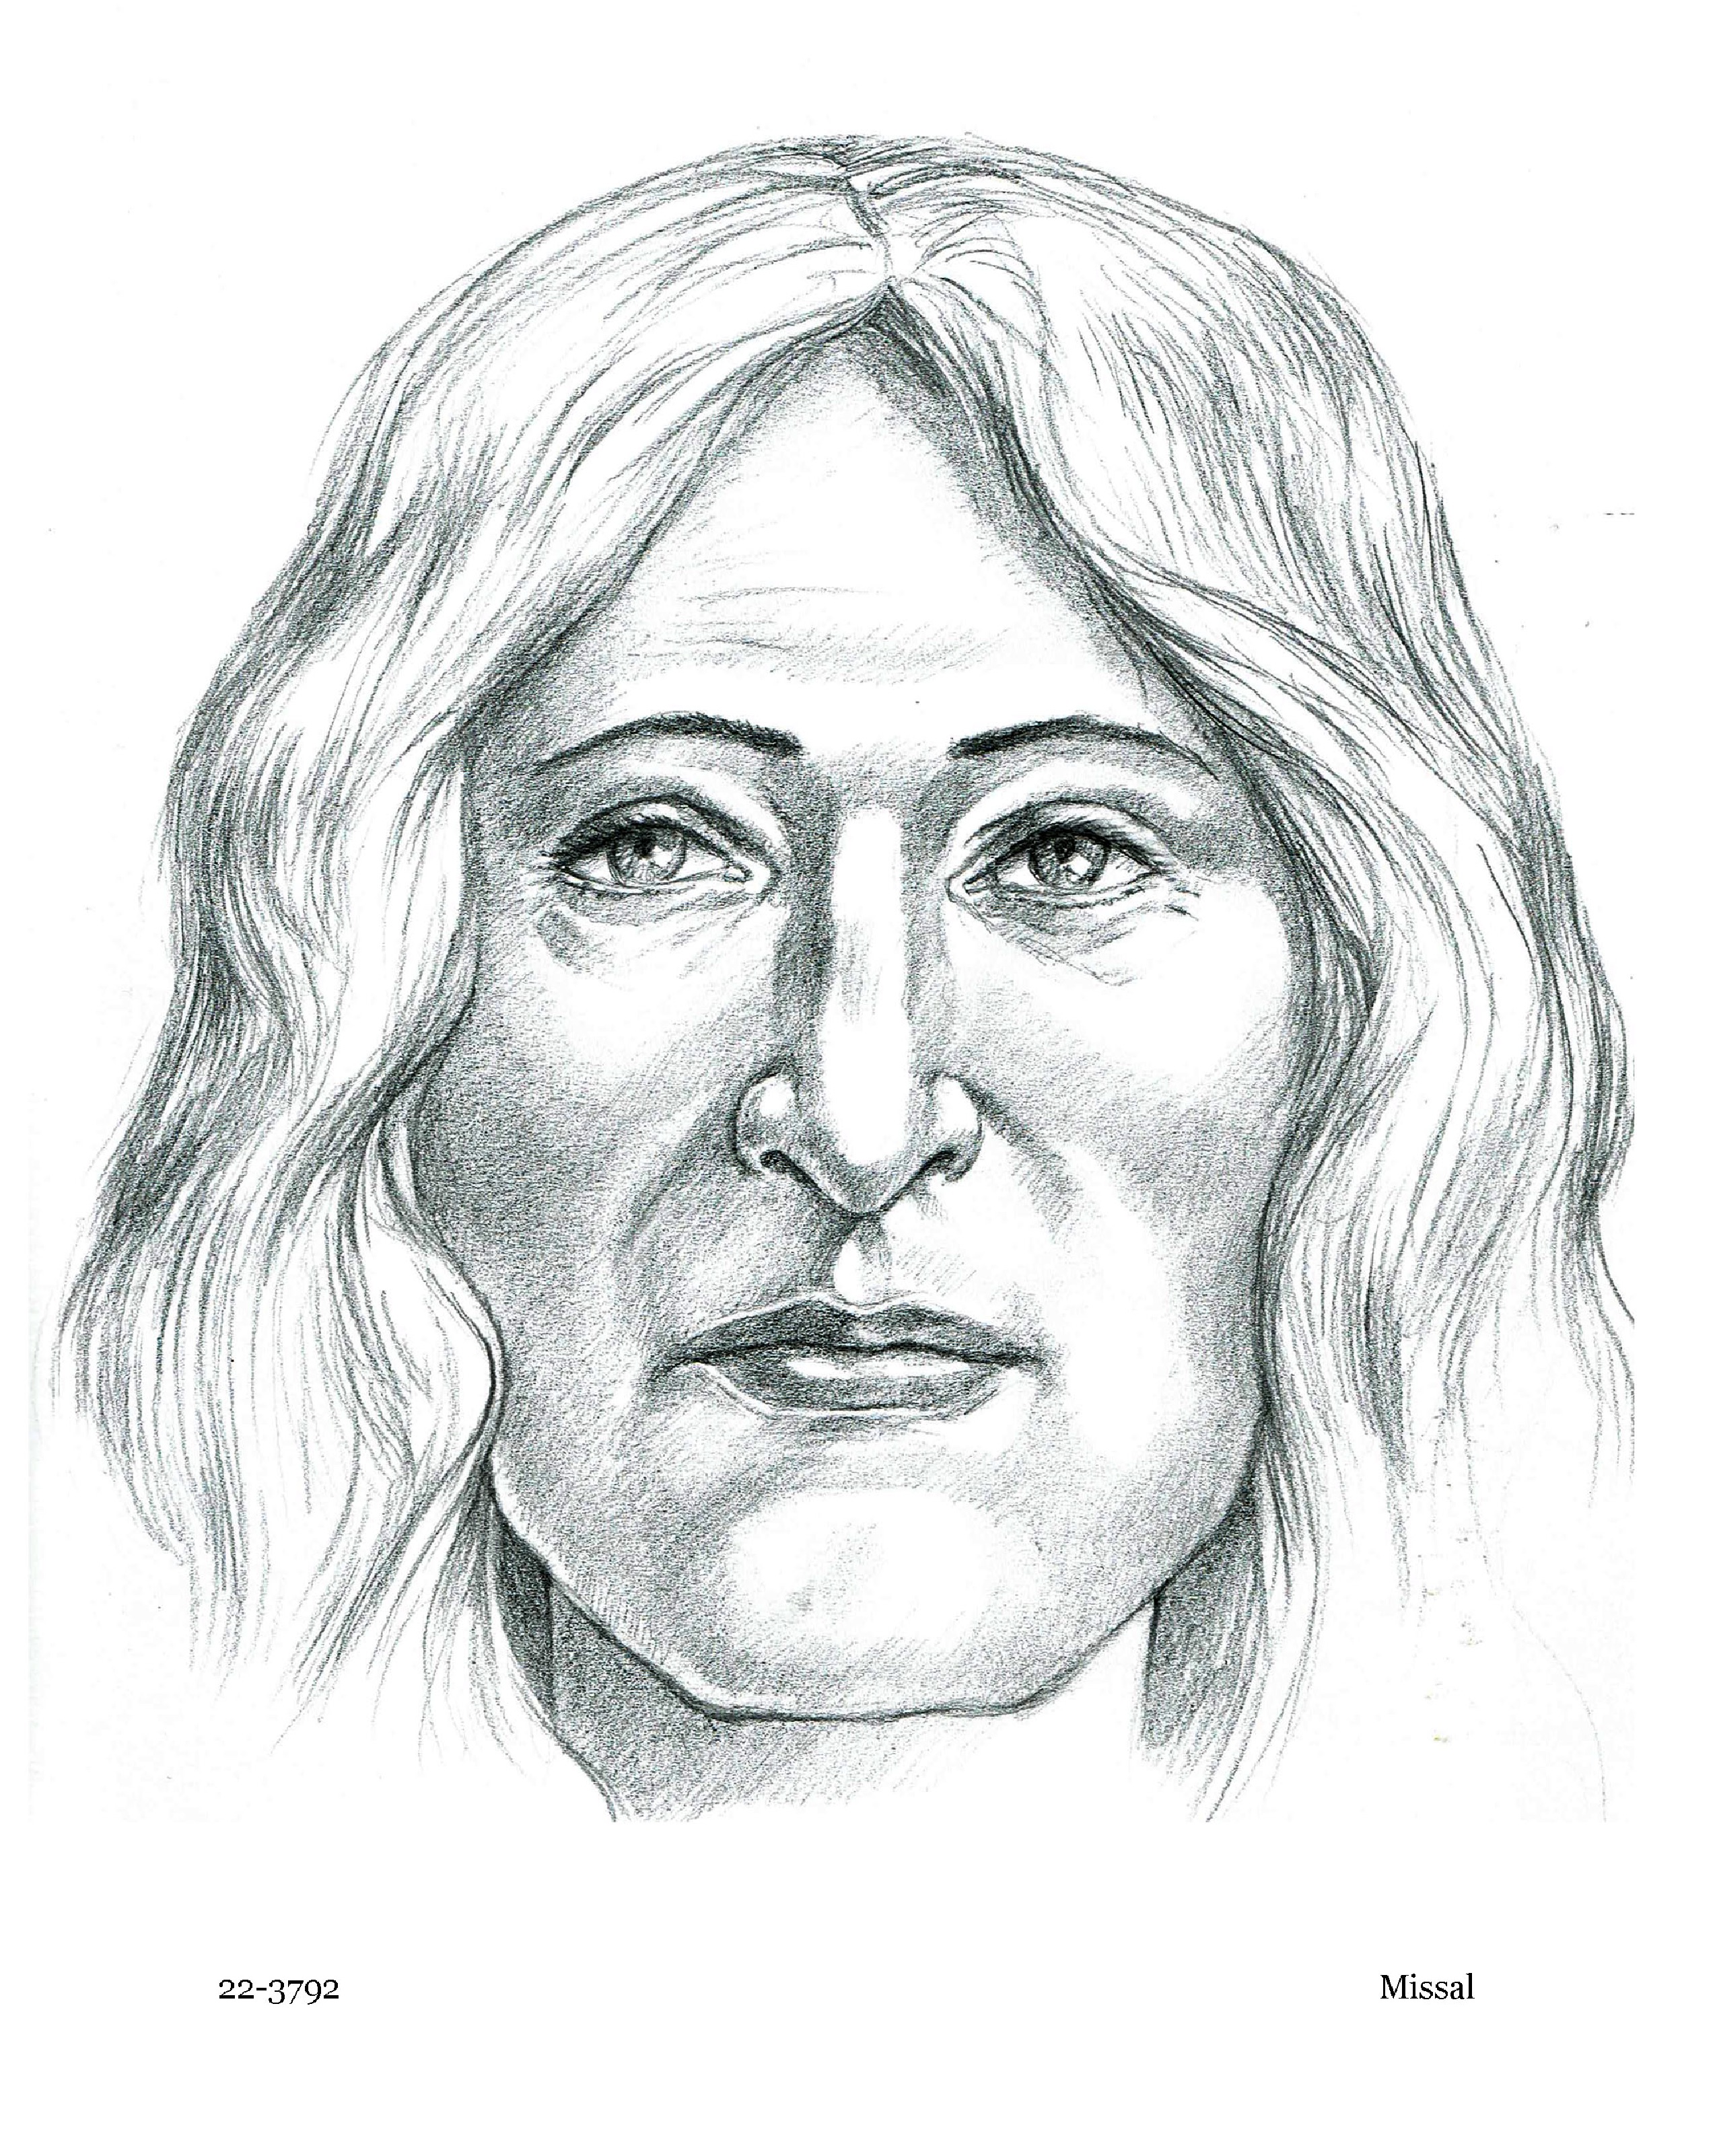 Case #22-3792. Biological male with blond wig.